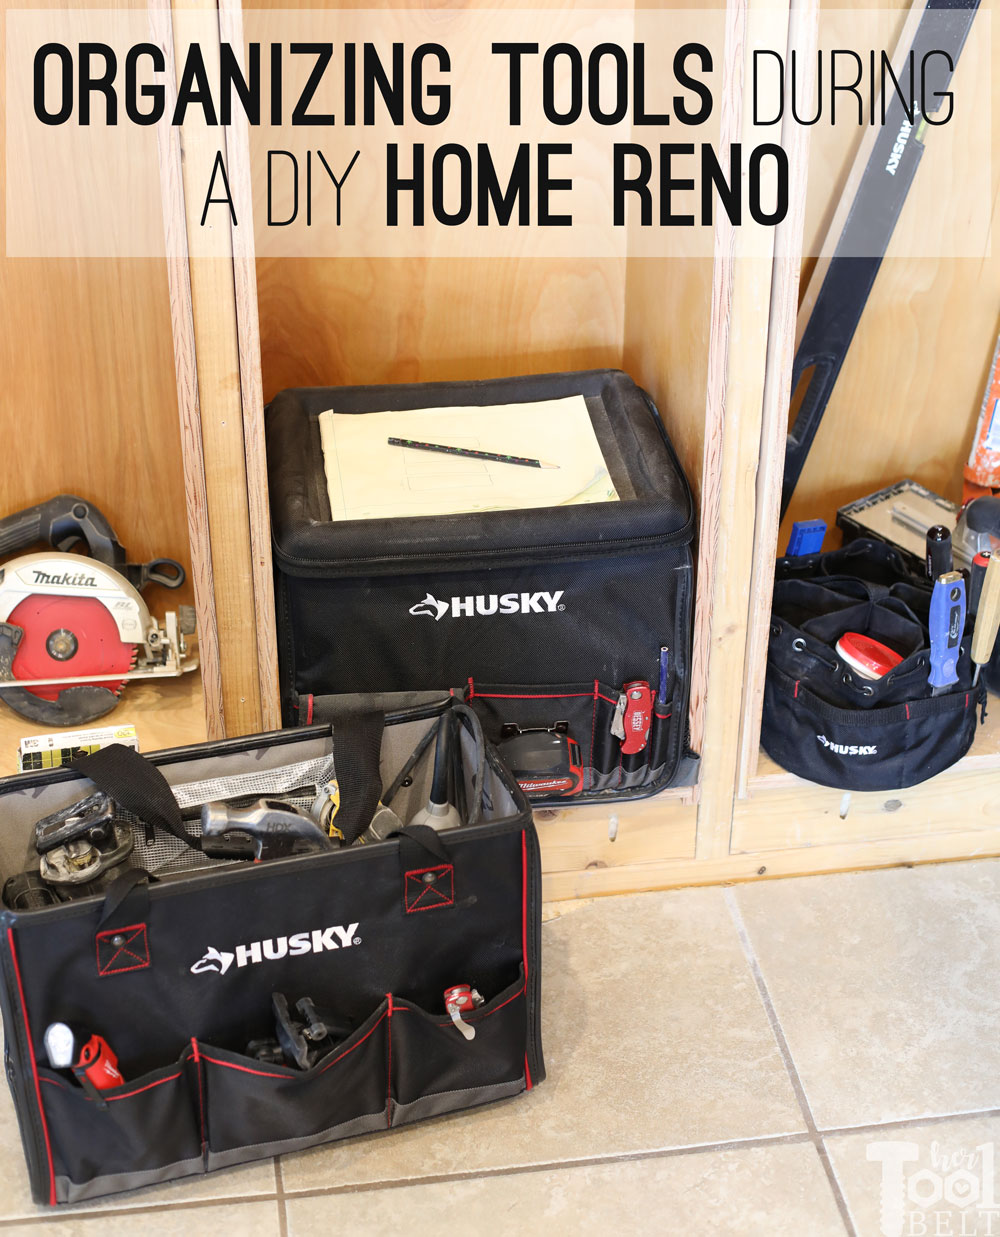 Husky Mobile Office and Tool Organizer Tote Review - Her Tool Belt